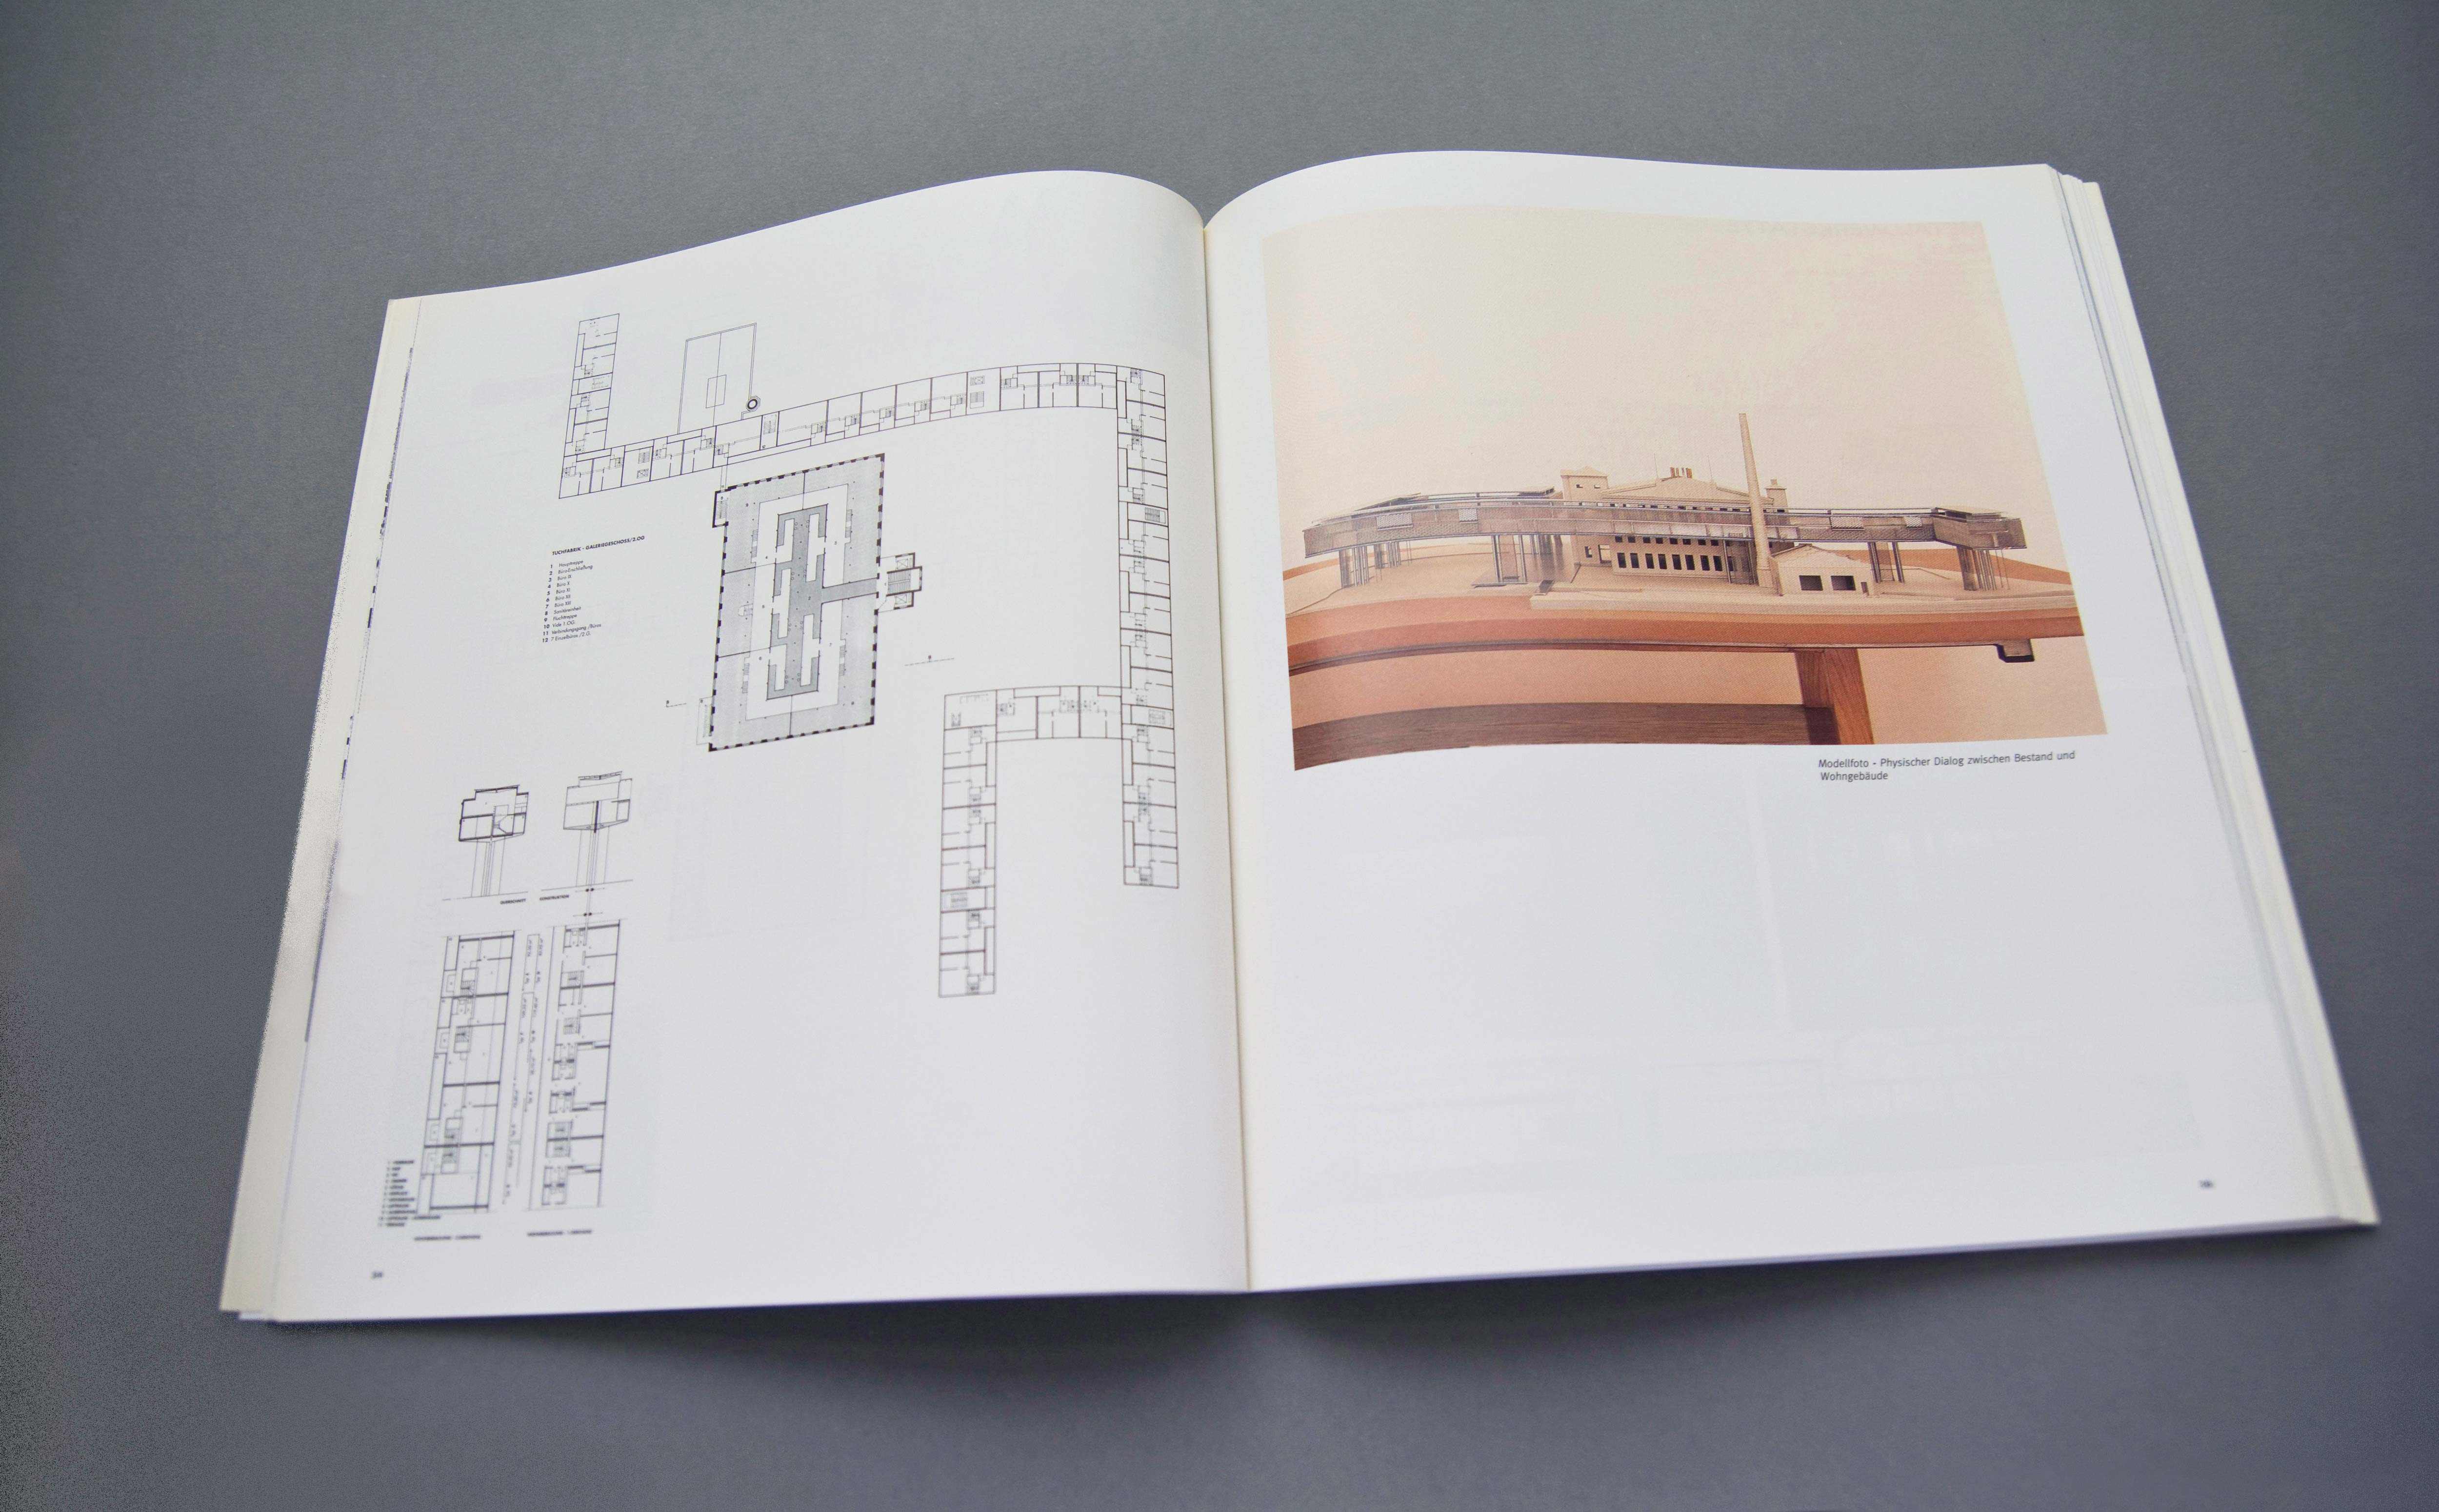 Double page. Left: Full-page floor plan. Right: Photo of architectural model.